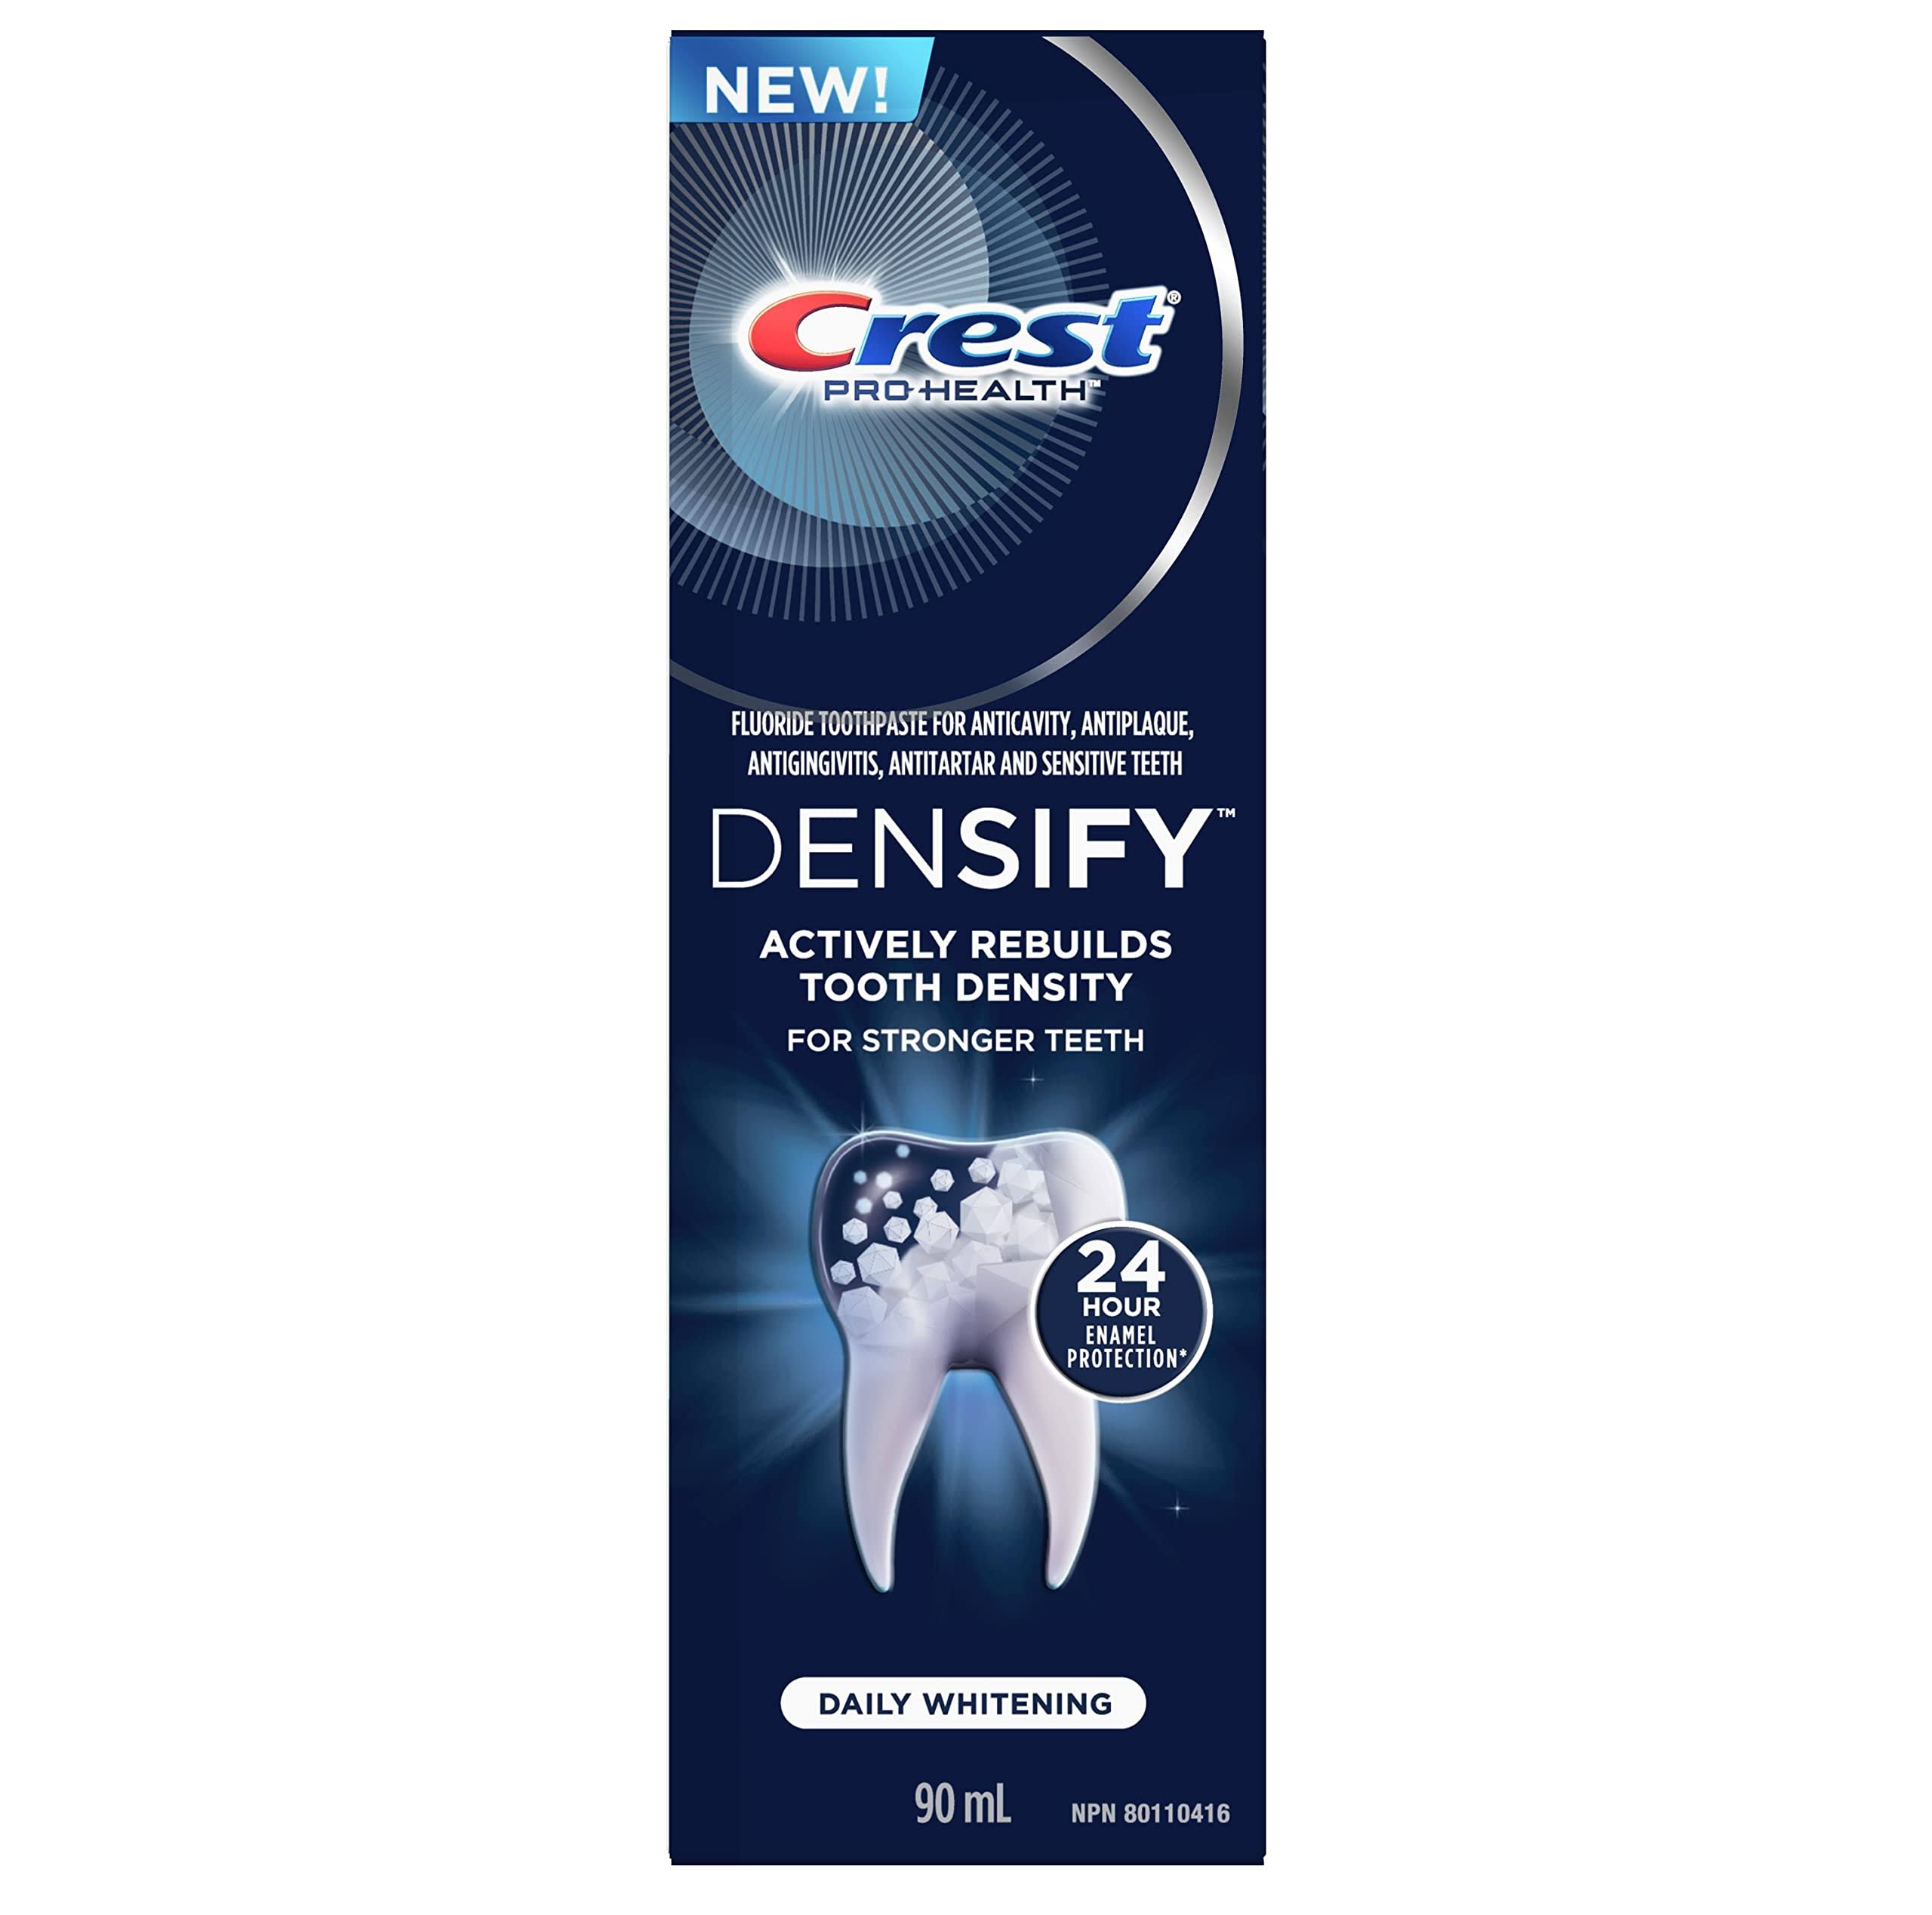 Crest Densify Whitening Daily Toothpaste - 90 ml